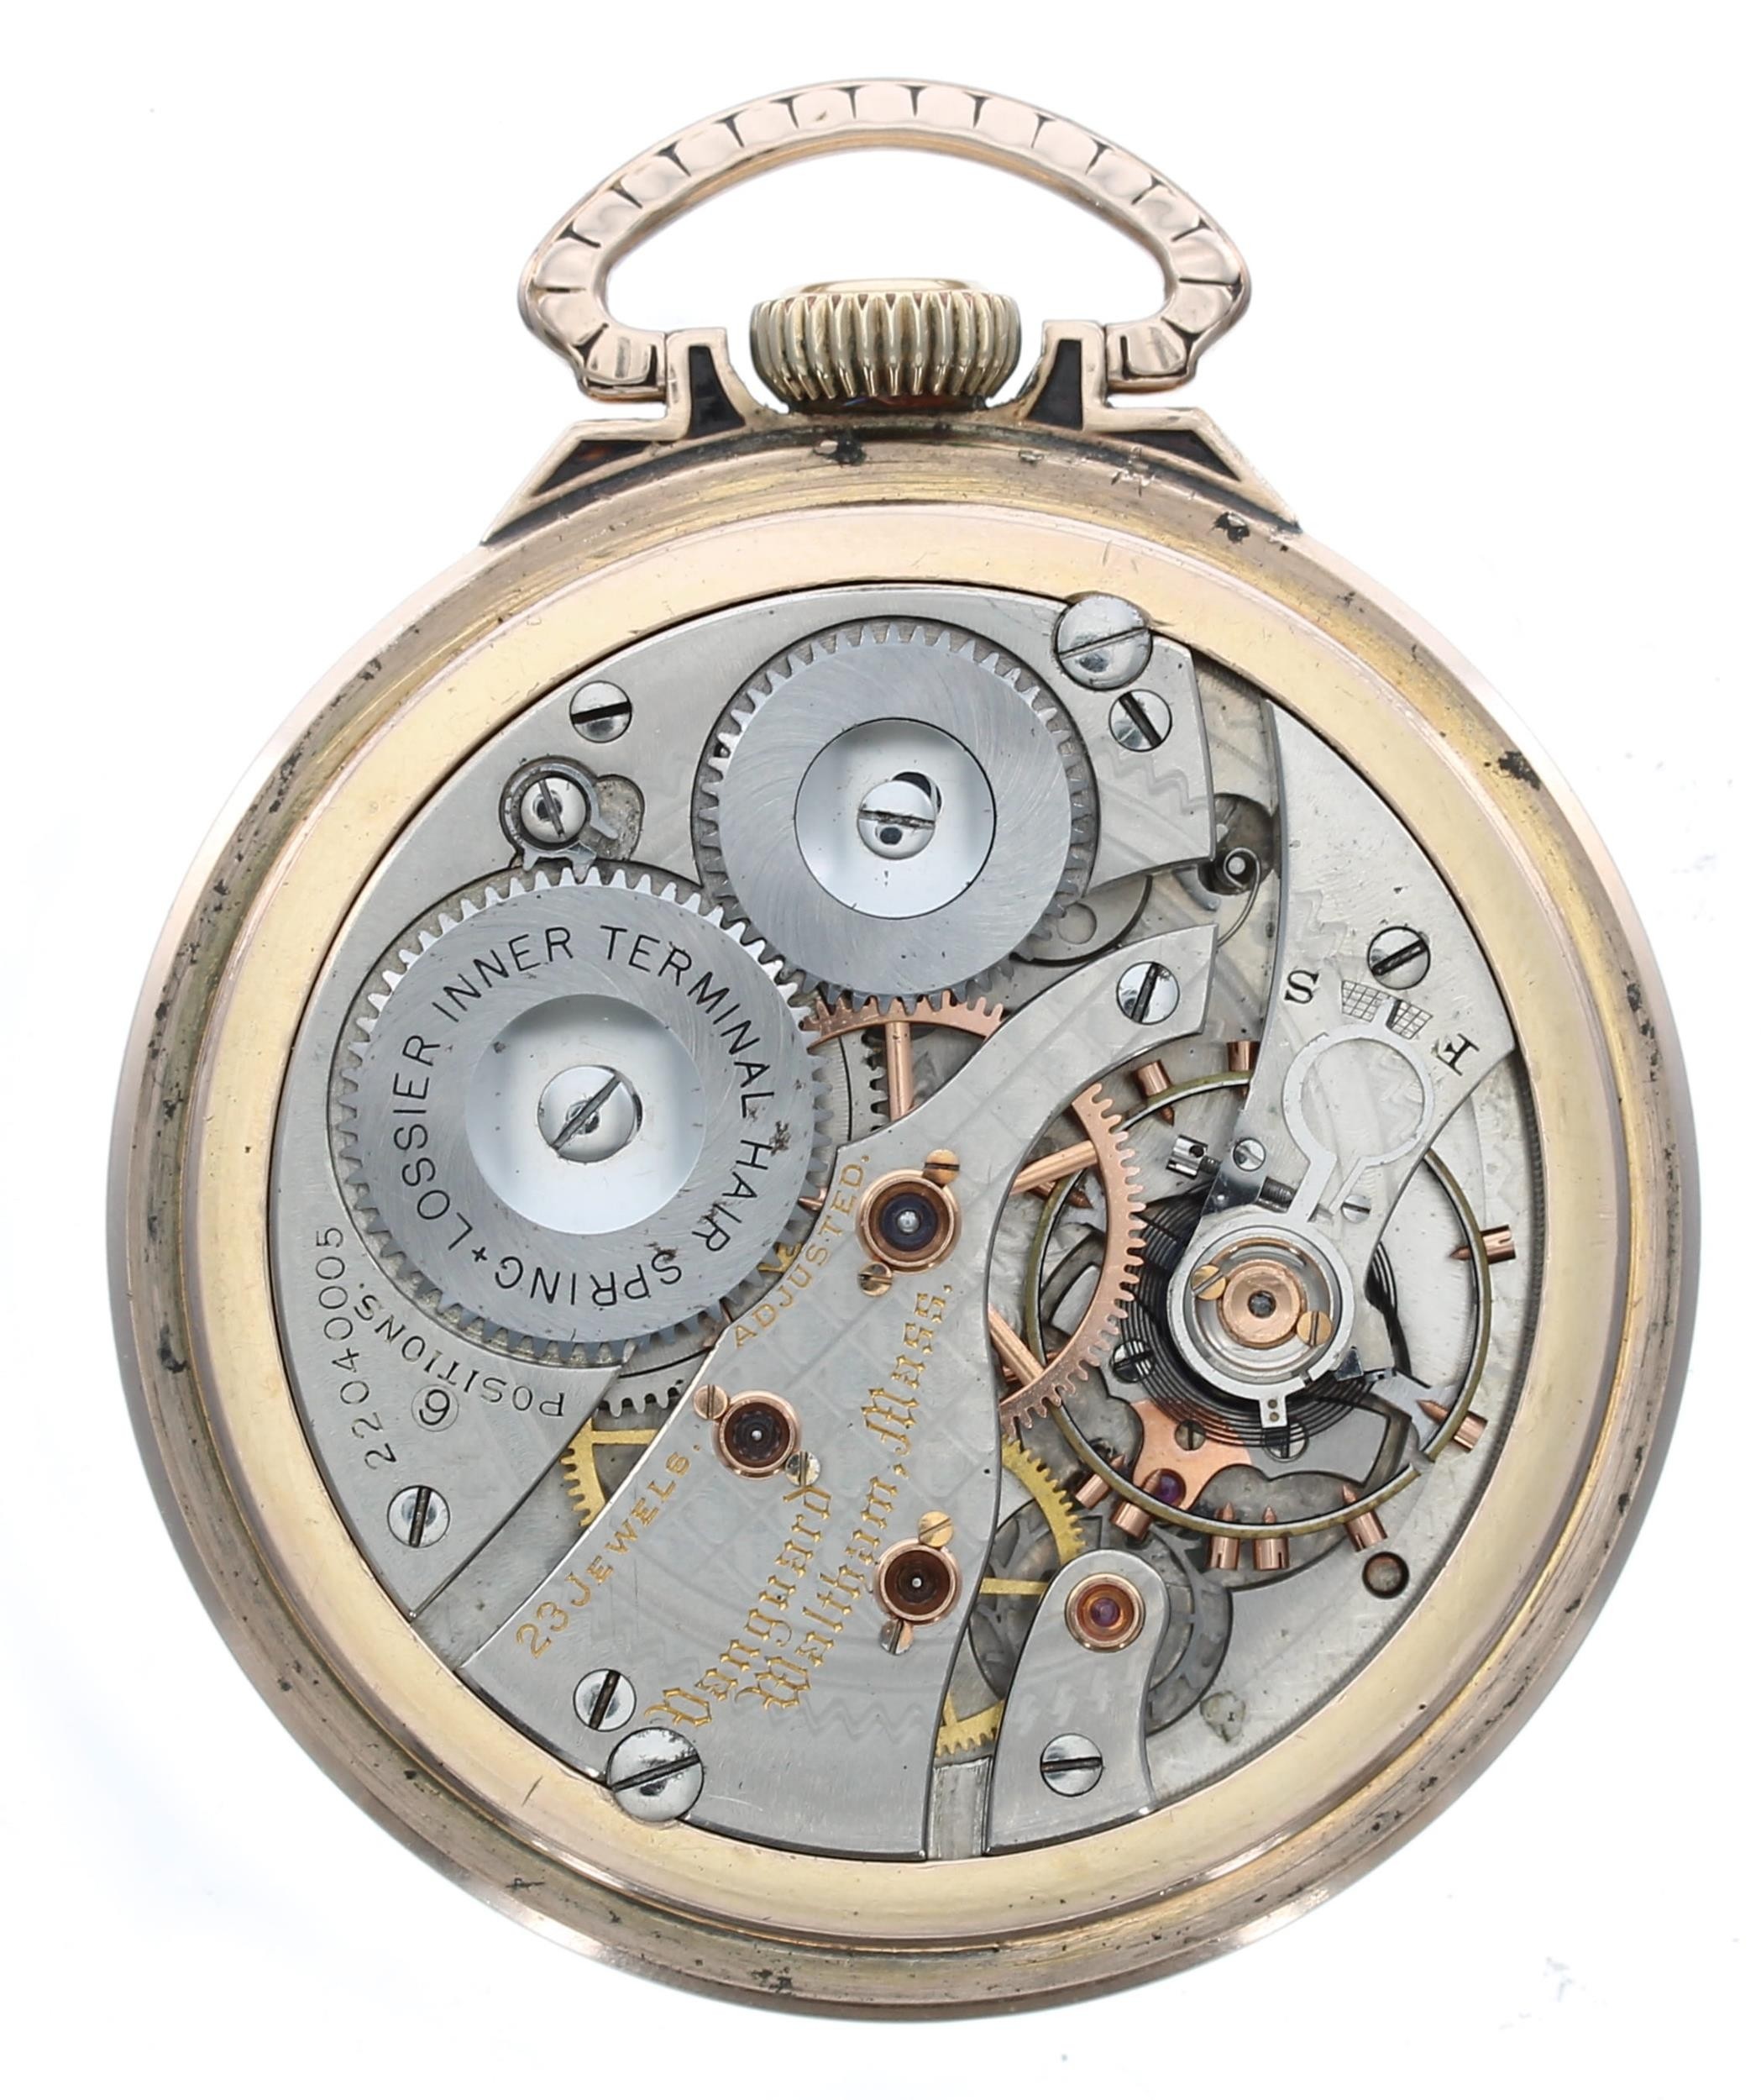 American Waltham 'Vanguard' 10k gold filled pocket watch with 'up/down' power reserve indicator, - Image 3 of 4